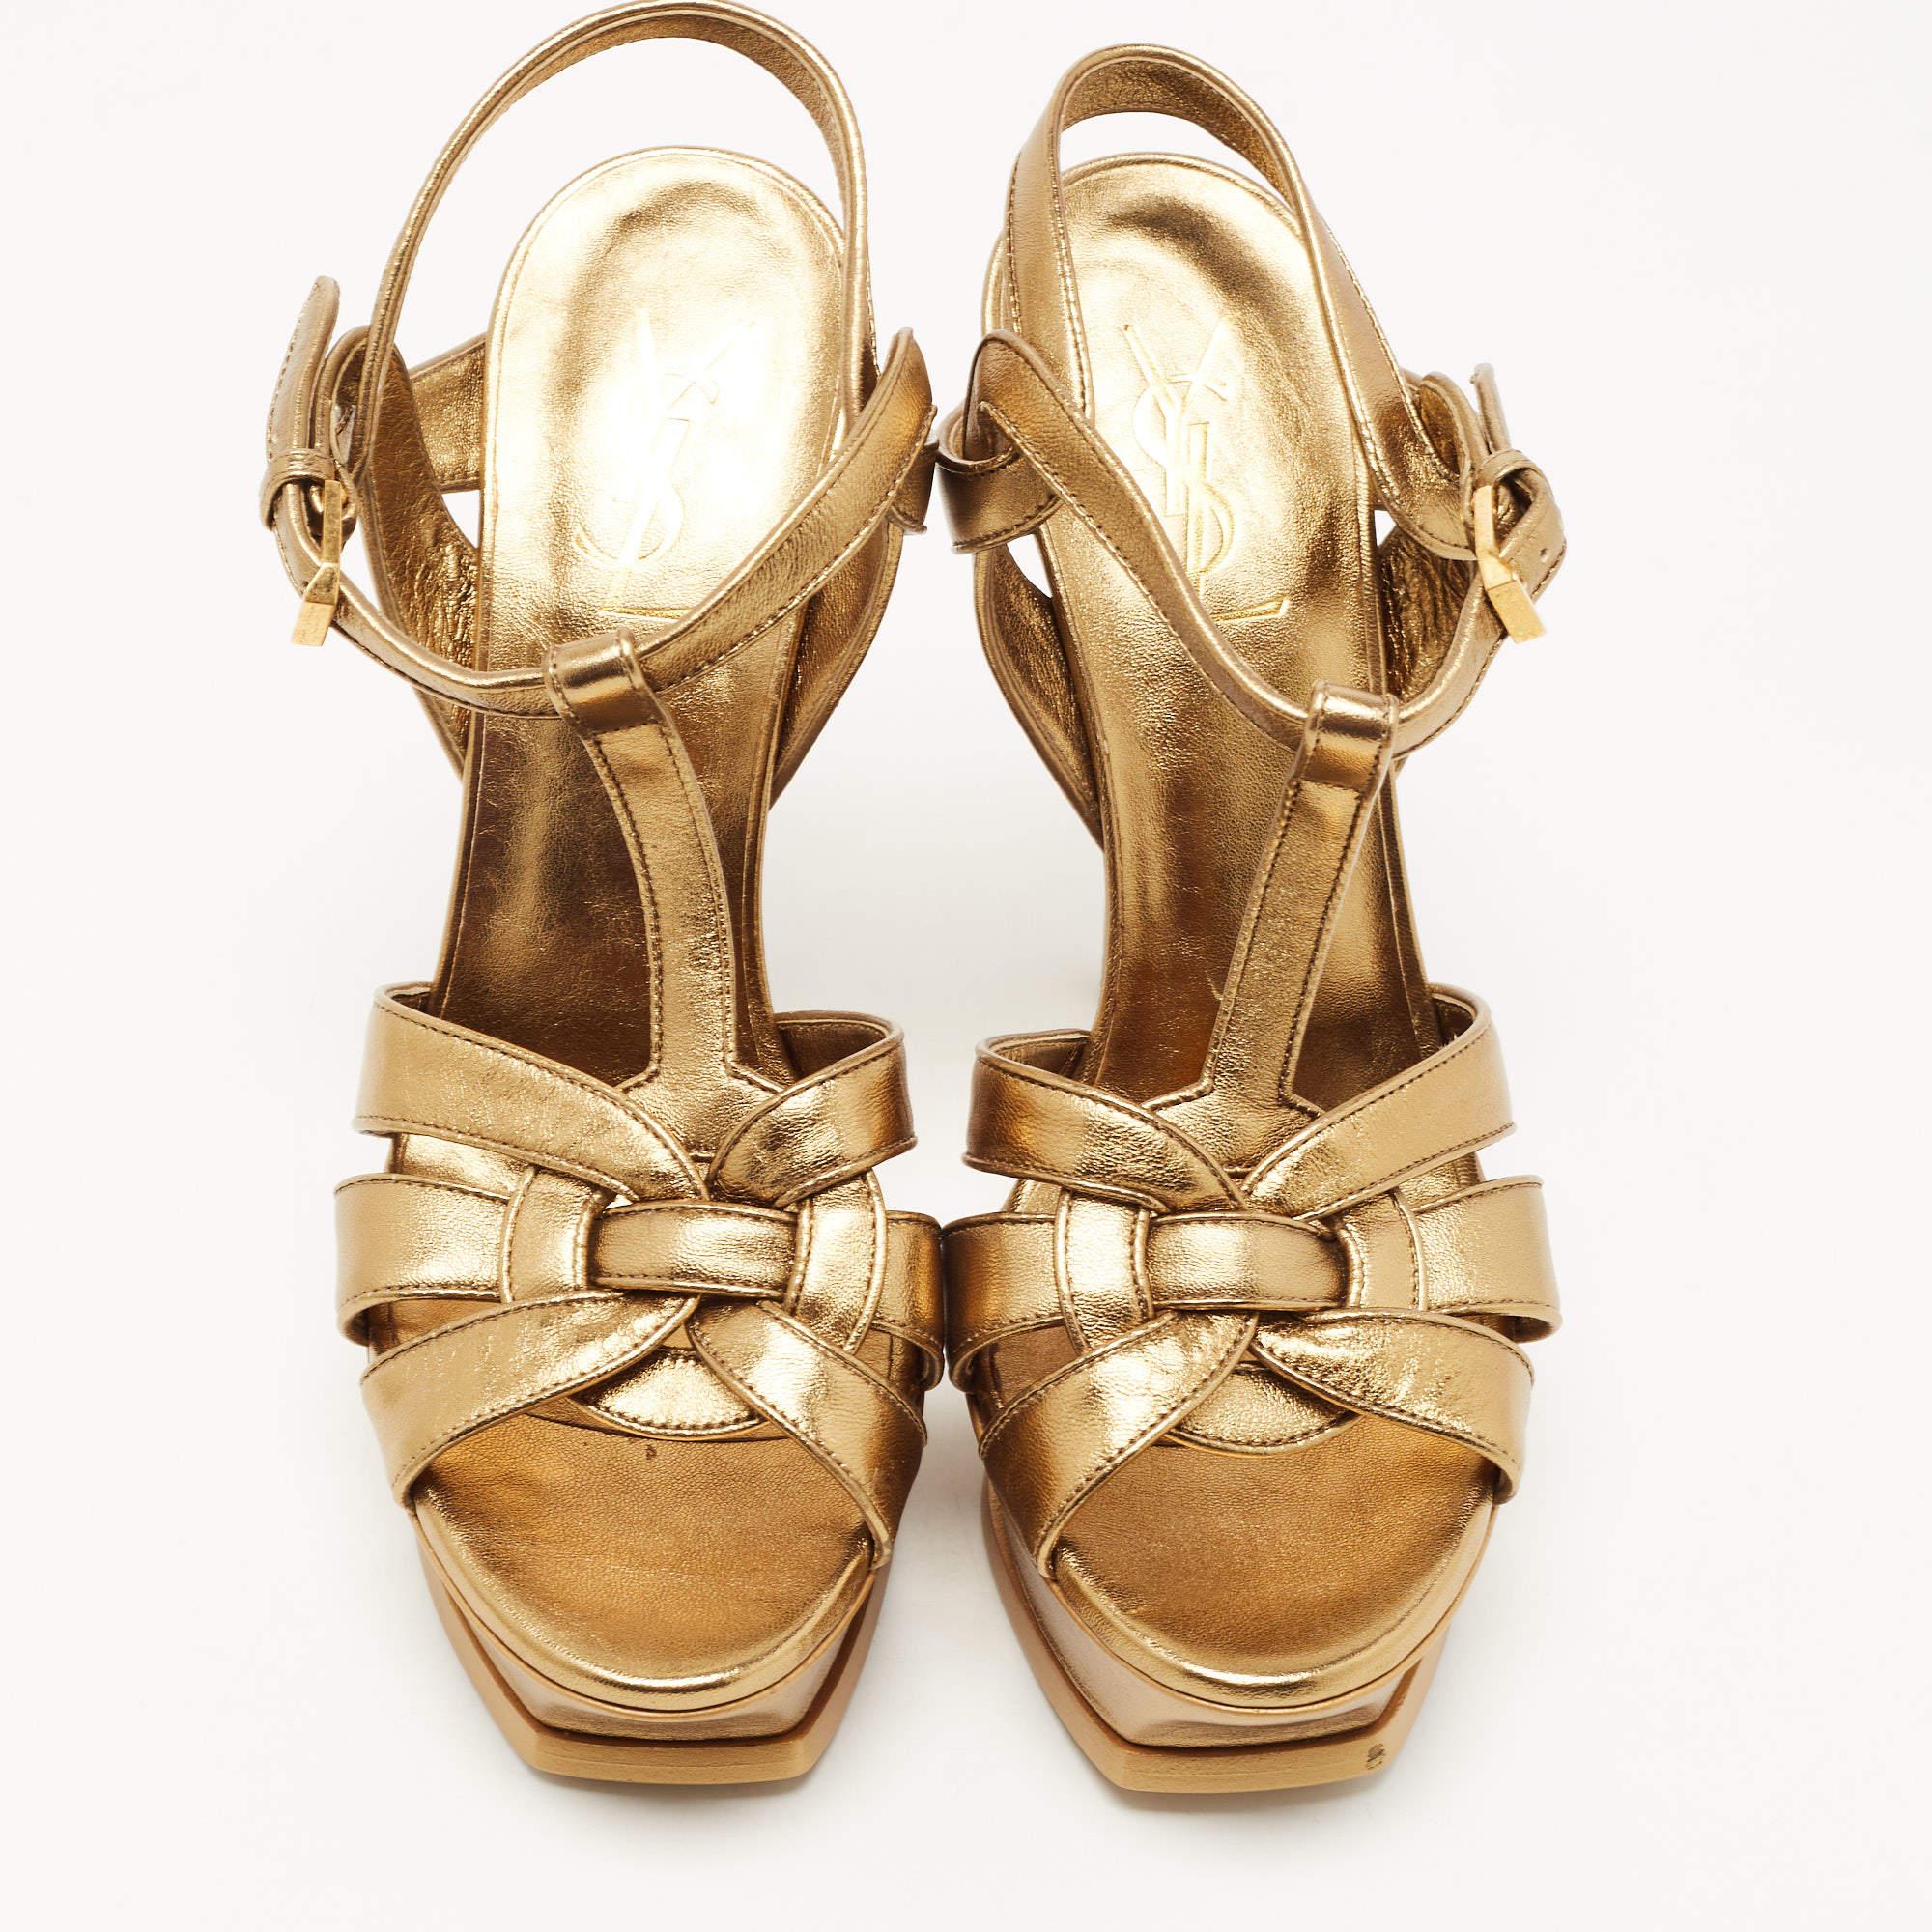 A timeless aesthetic and stellar craftsmanship in shoemaking are evident in these Saint Laurent platform sandals. From their interwoven construction using leather to the sturdy heels supported by platforms, these metallic gold-hued Tribute sandals